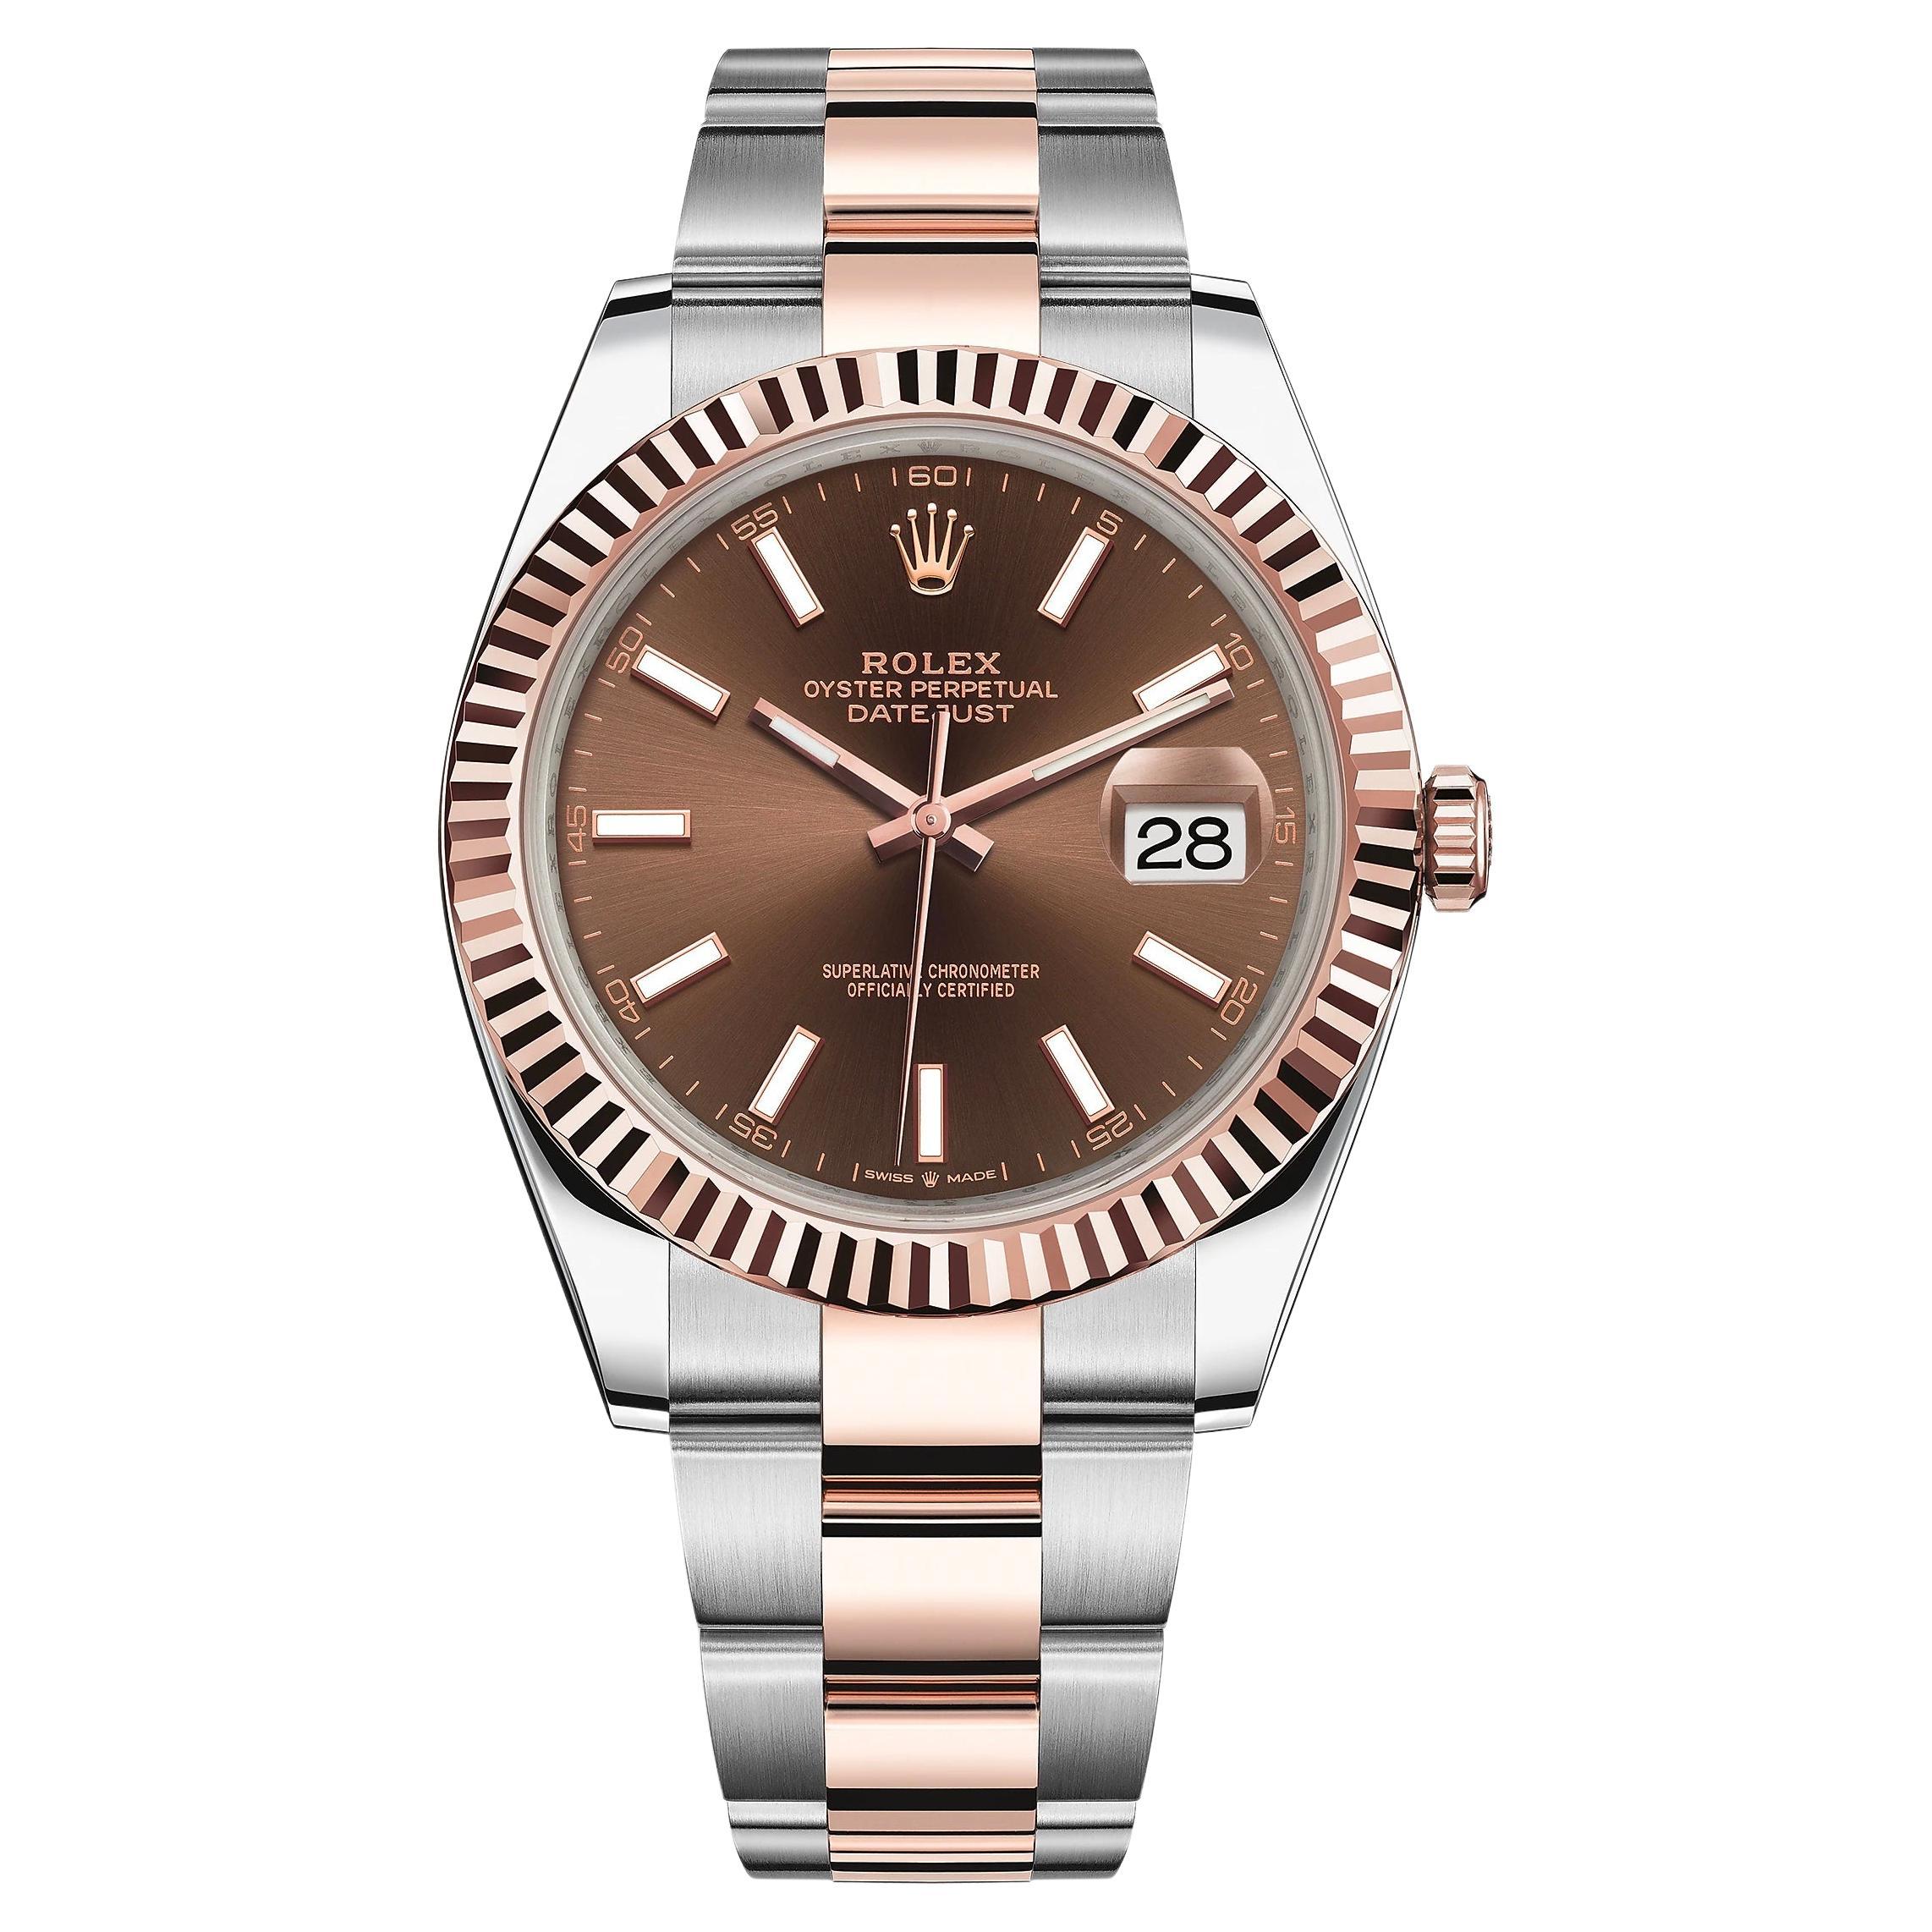 Rolex Datejust, Chocolate, Oyster, Fluted, 126331, Unworn Watch, Complete For Sale